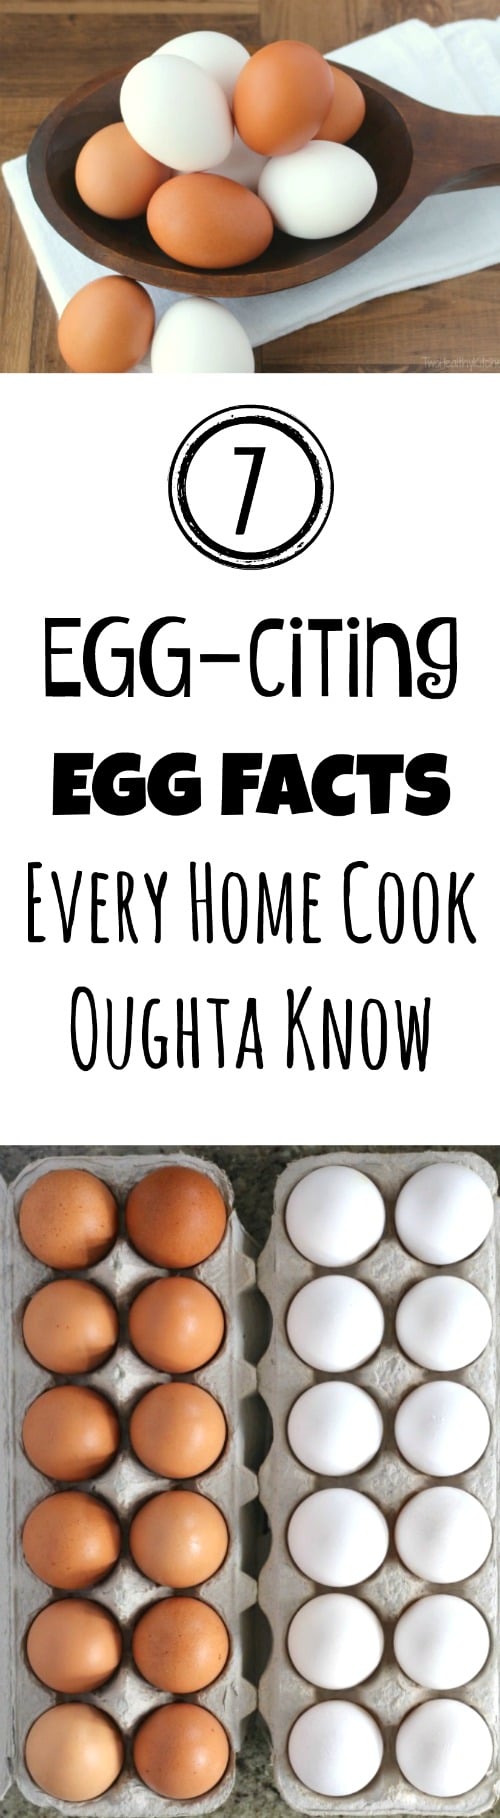 7 EGG-citing Egg Facts Every Home Cook Oughta Know {www.TwoHealthyKitchens.com}